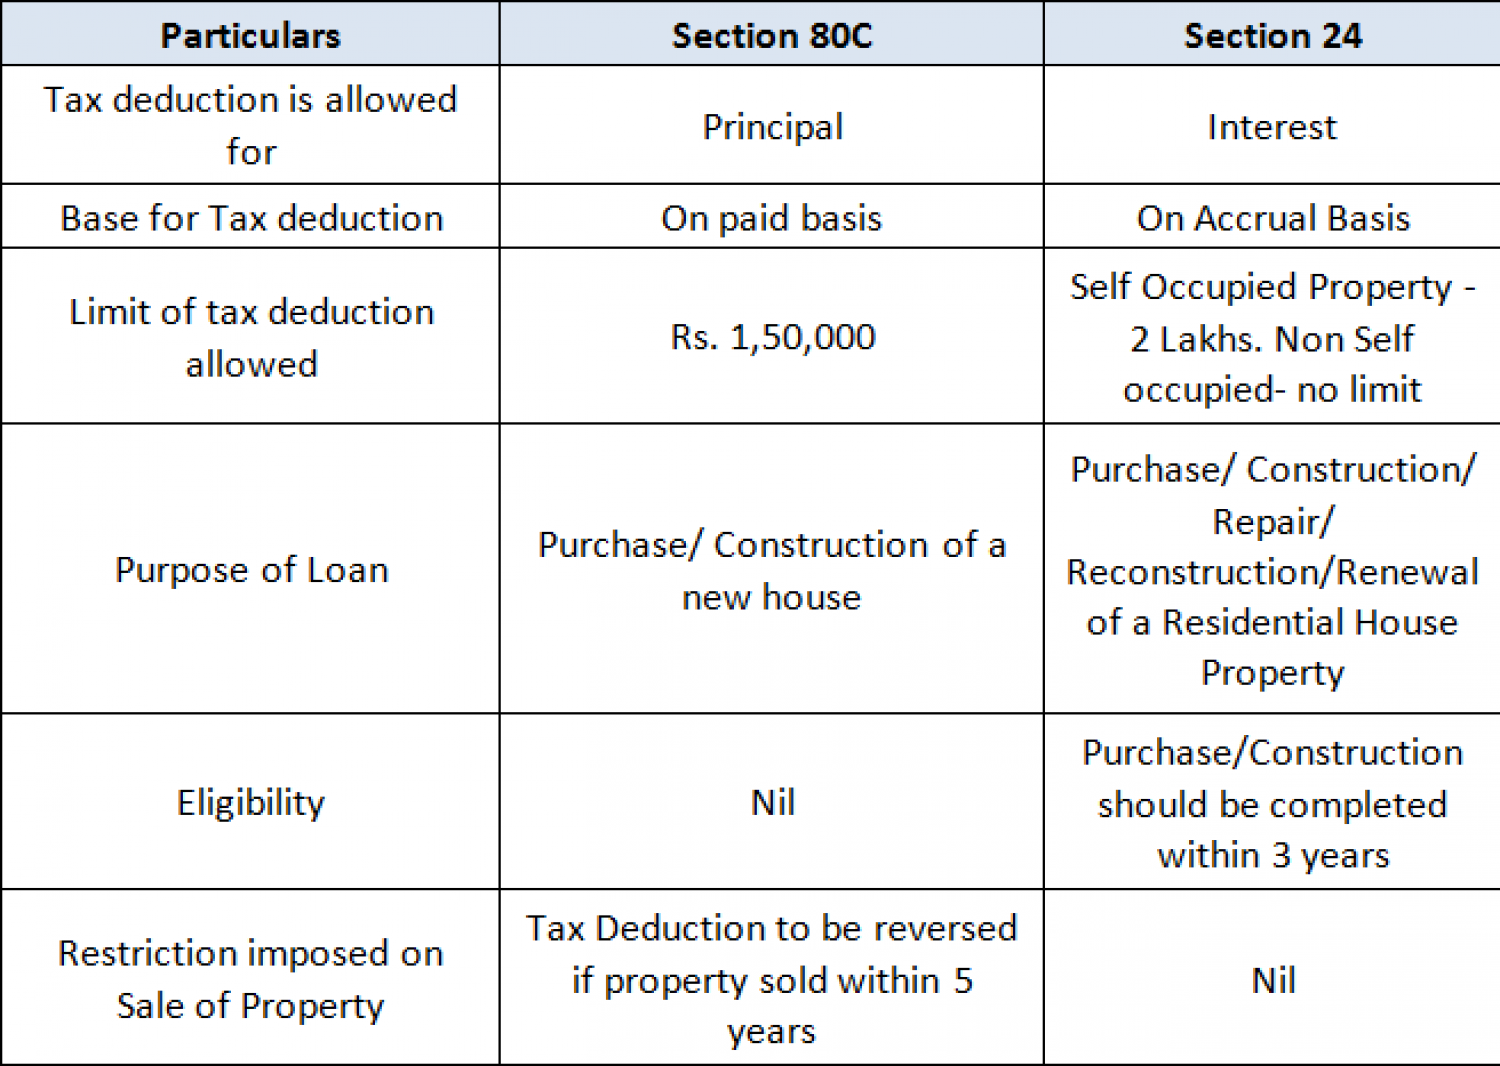 Can HRA Home Loan Benefits Be Claimed When ITR Is Filing 